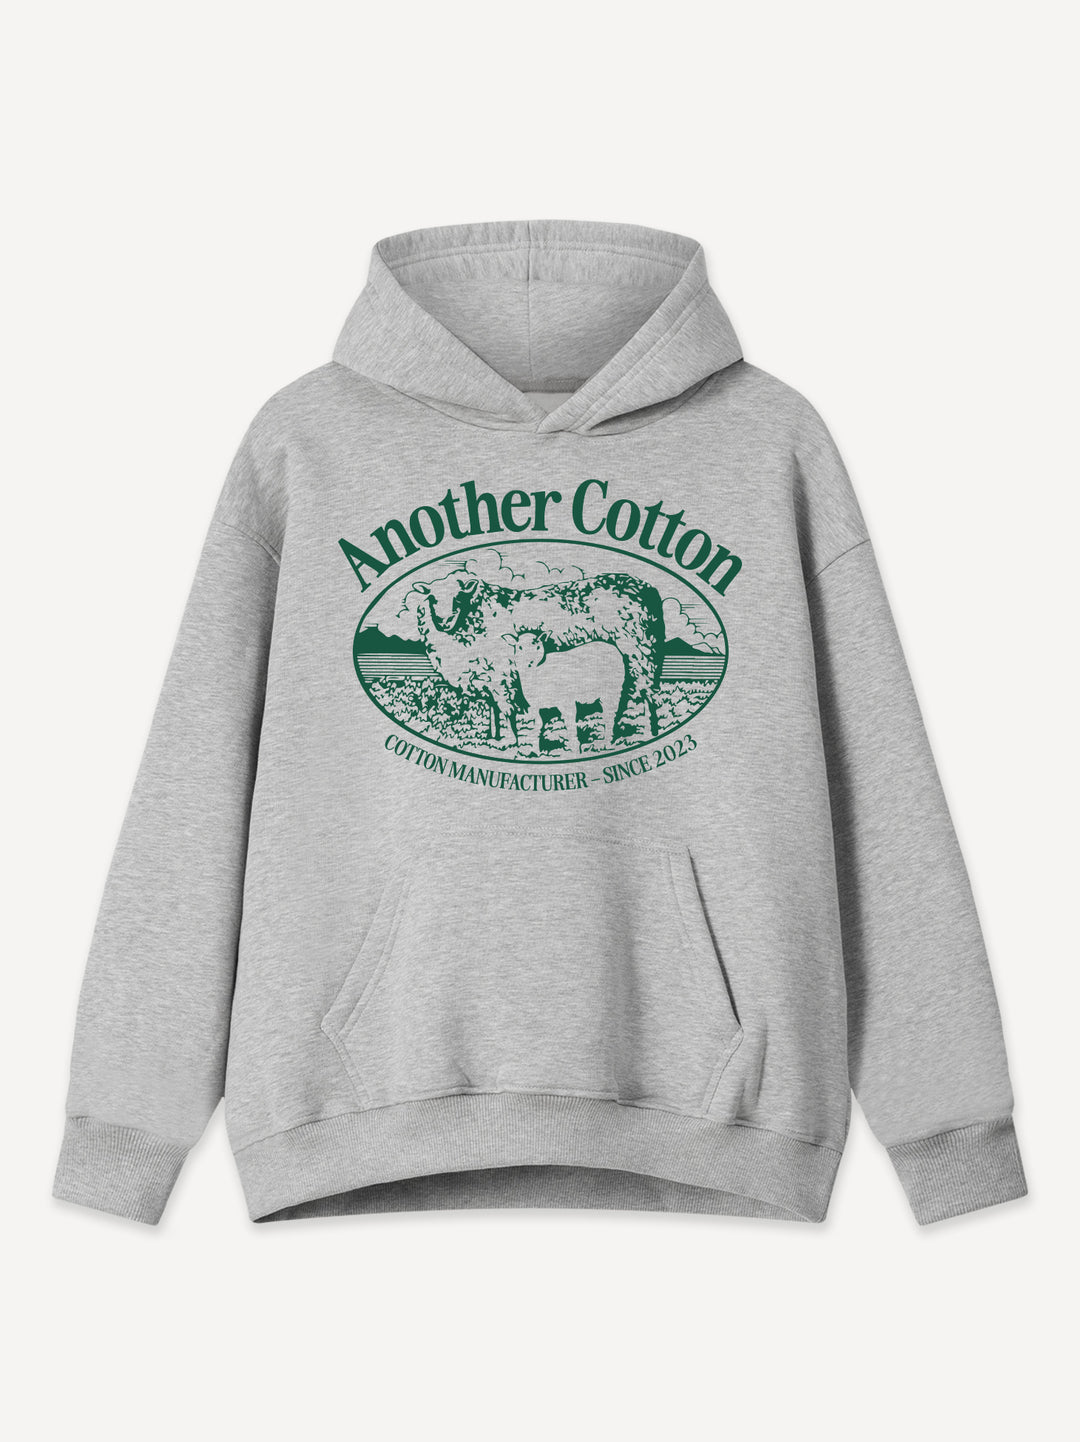 Cotton Manufacture Oversize Hoodie